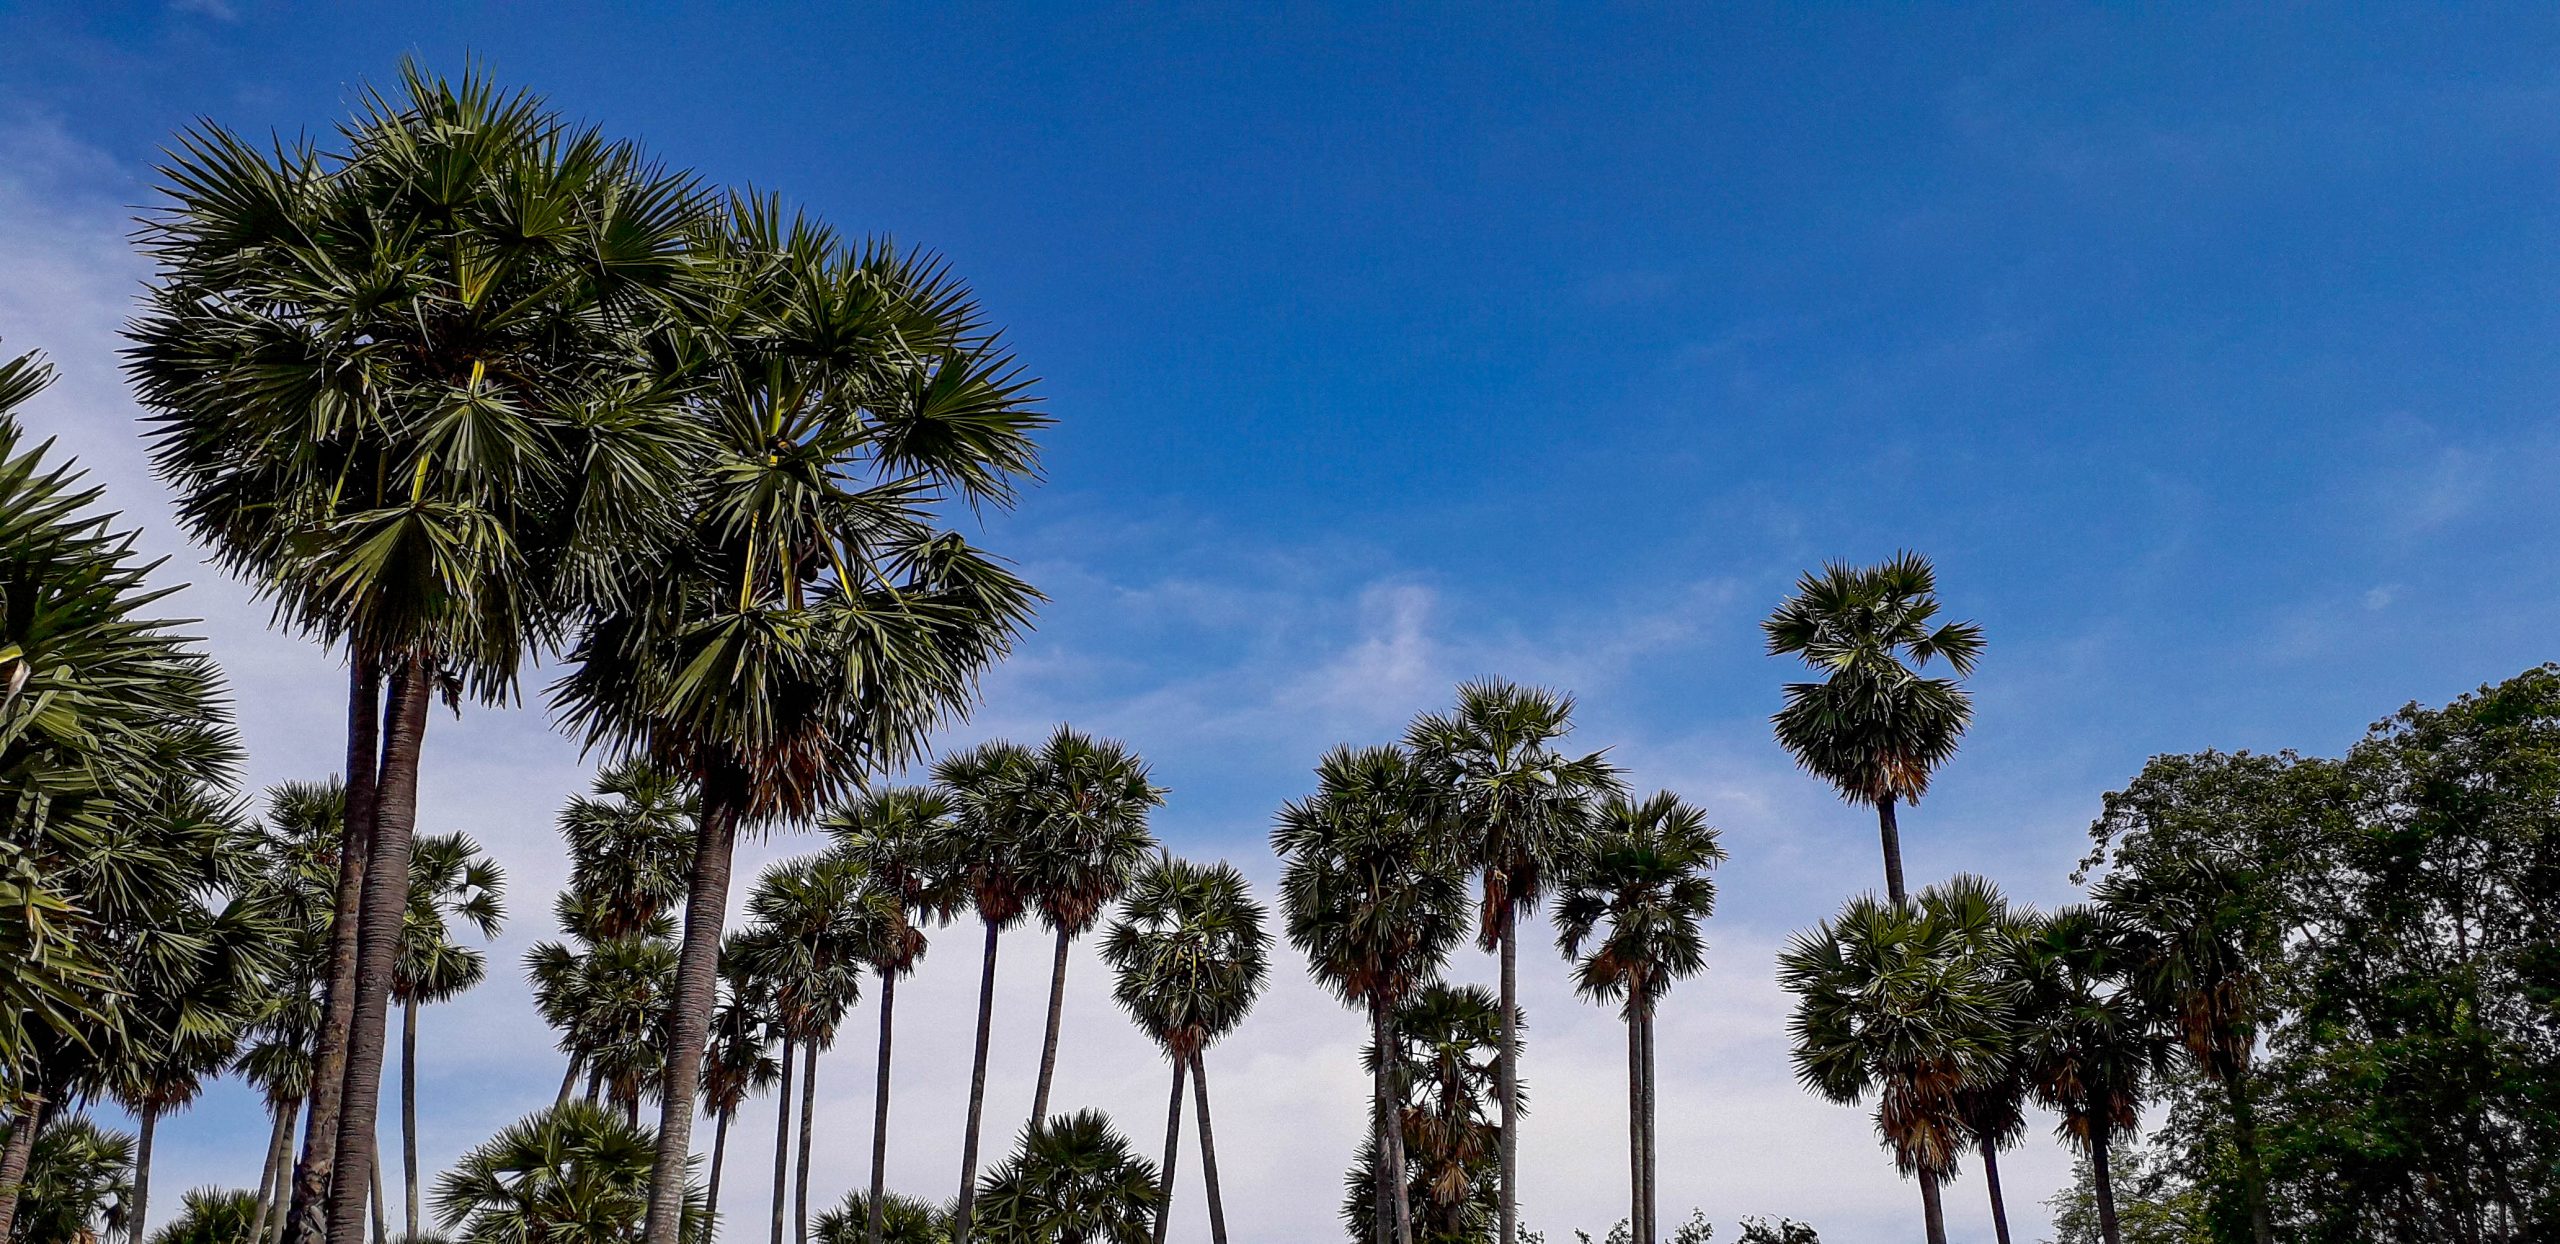 palm trees and the blue sky